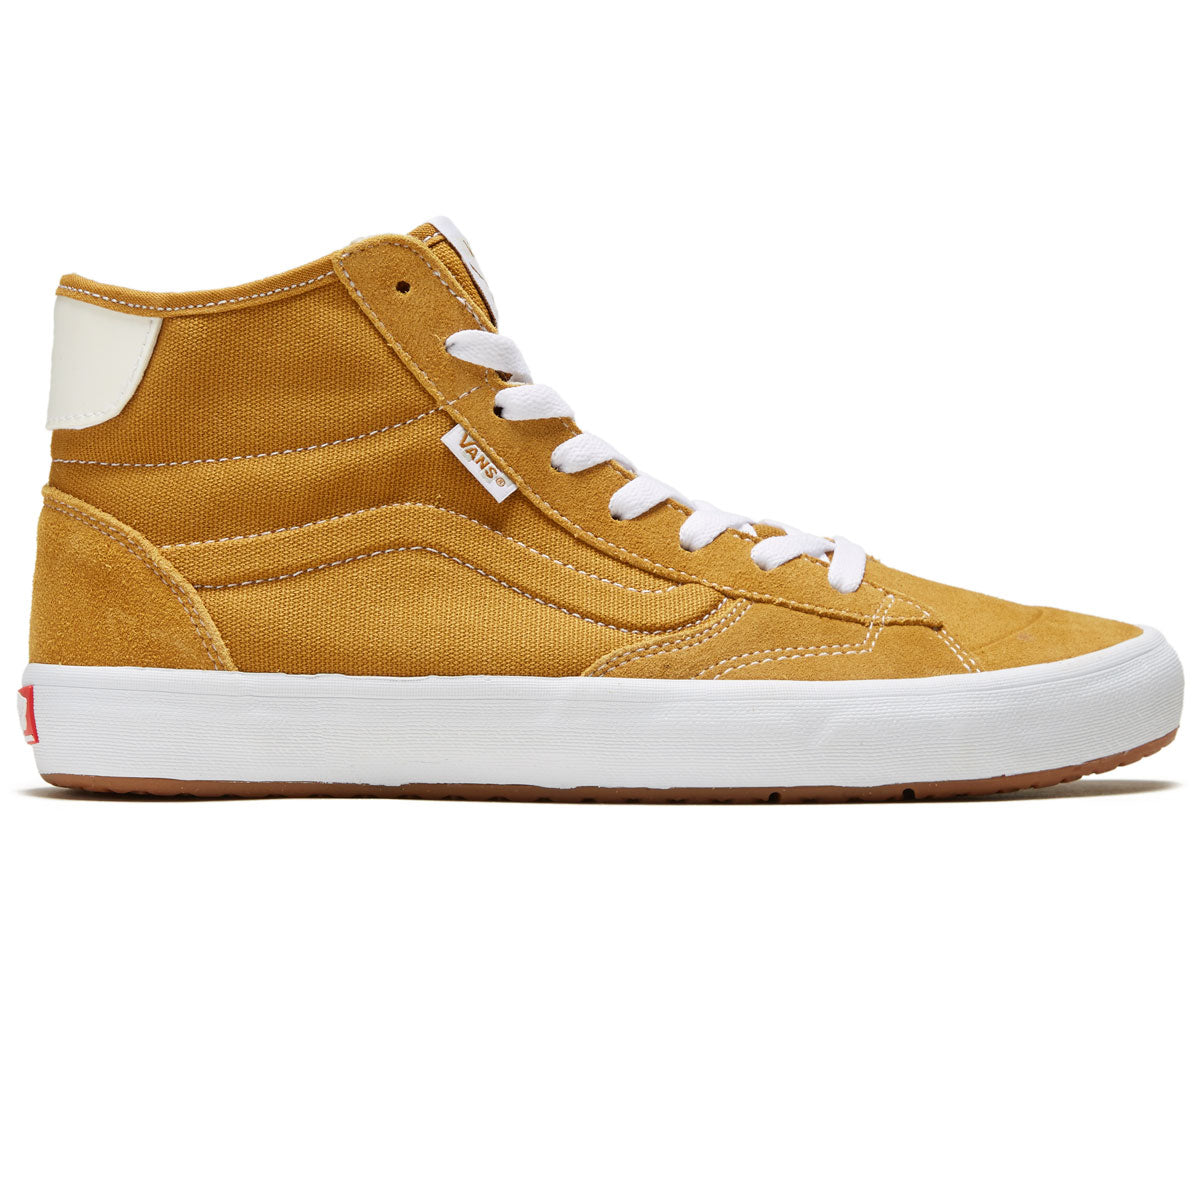 Vans The Lizzie Shoes - Gold/White image 1